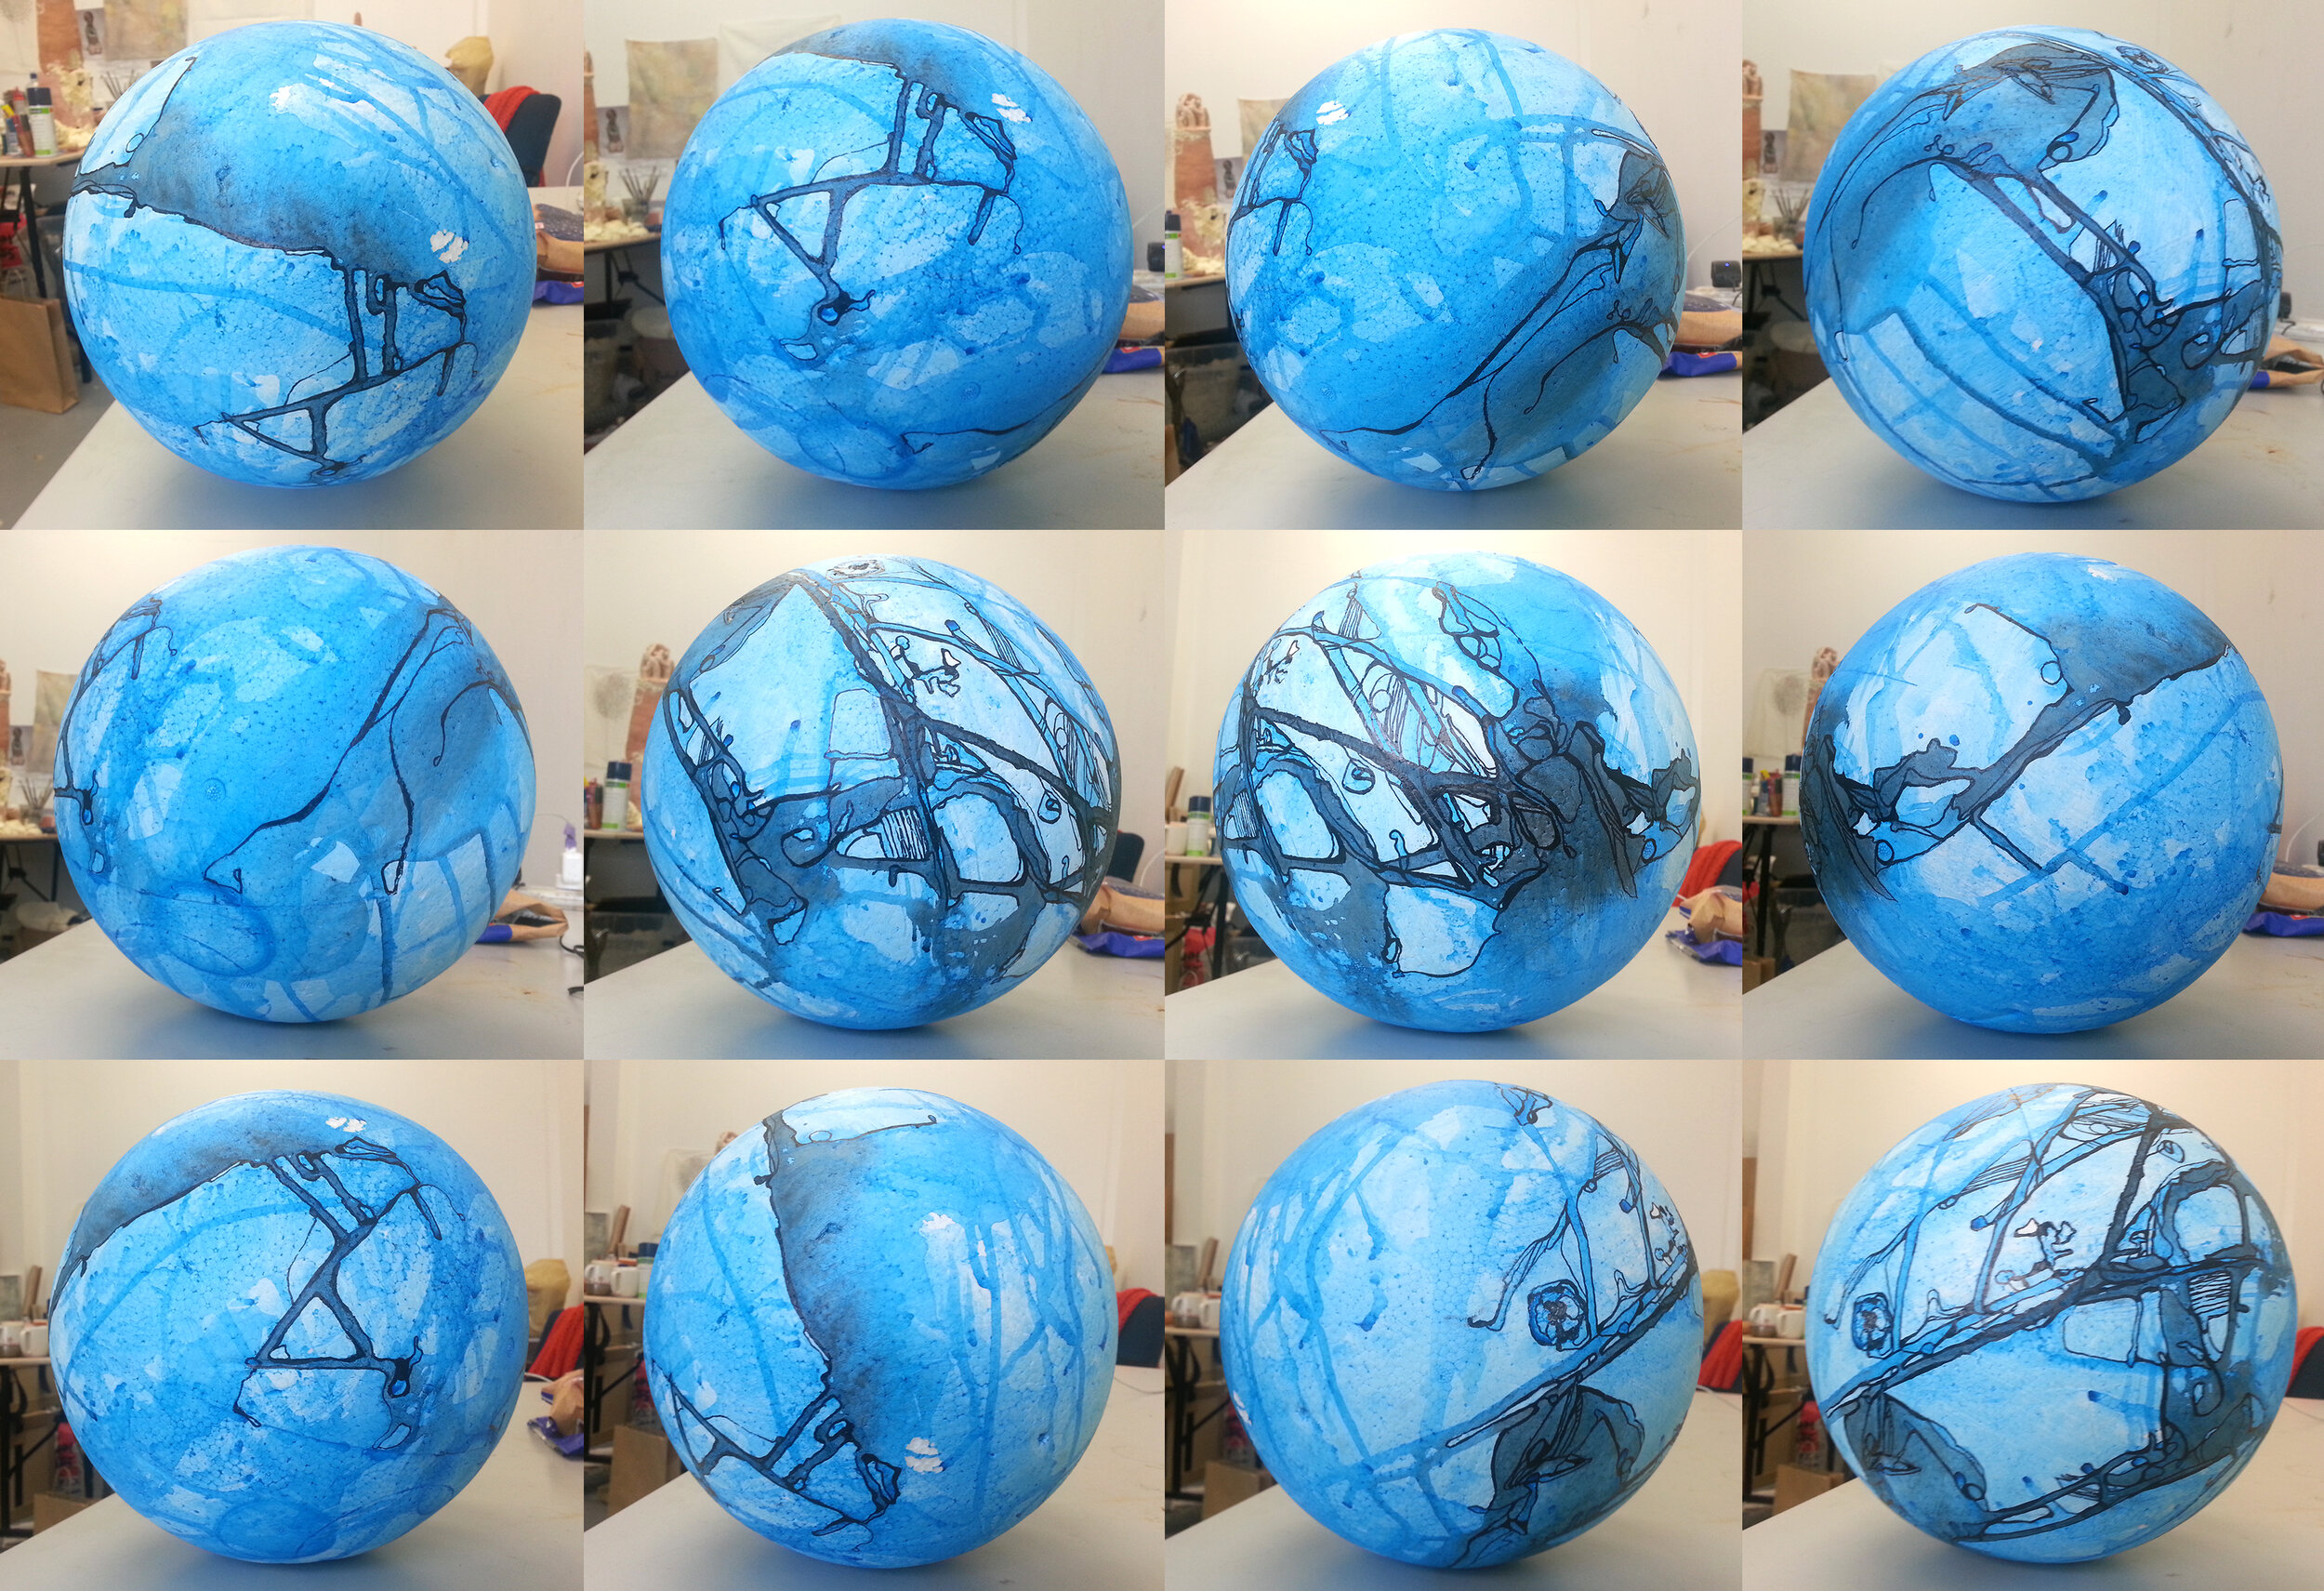  Acrylics and ink on polystyrene ball, 20cm diameter. 